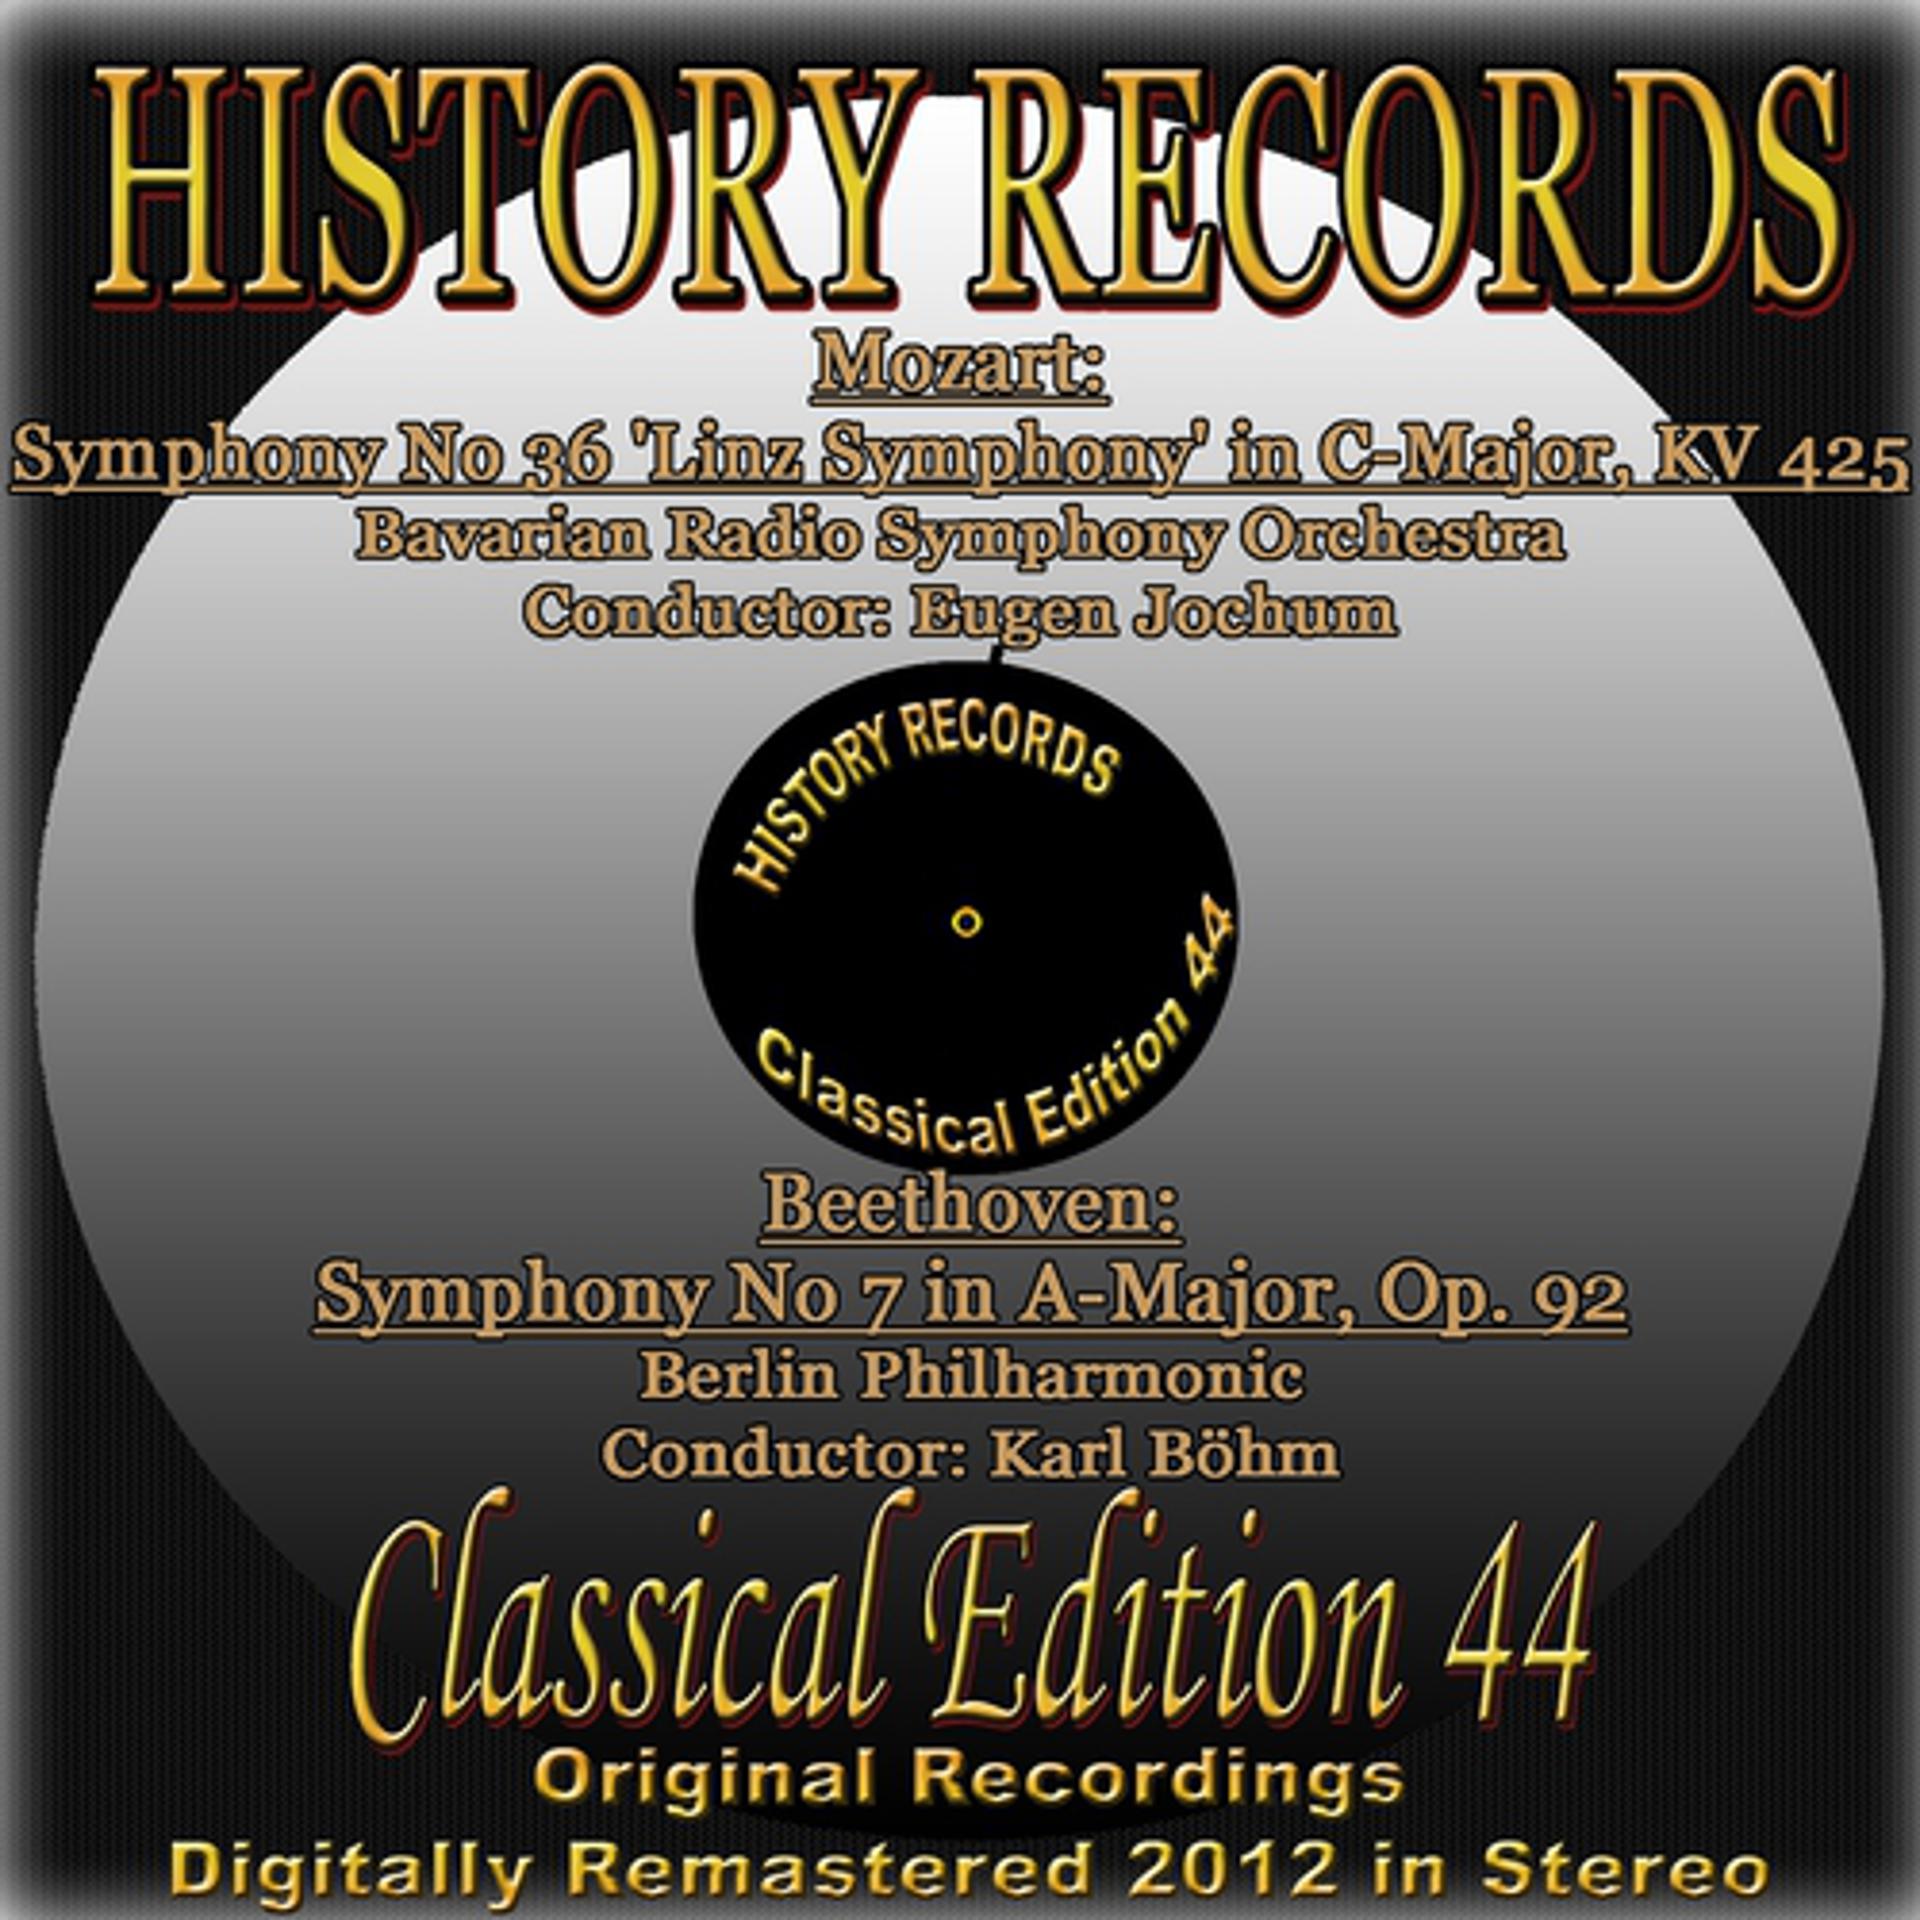 Постер альбома Mozart: Symphony No 36 'Linz Symphony' in C-Major, KV 425 & Beethoven: Symphony No 7 in A-Major, Op. 92 (History Records - Classical Edition 44 - Original Recordings Digitally Remastered 2012 In Stereo)